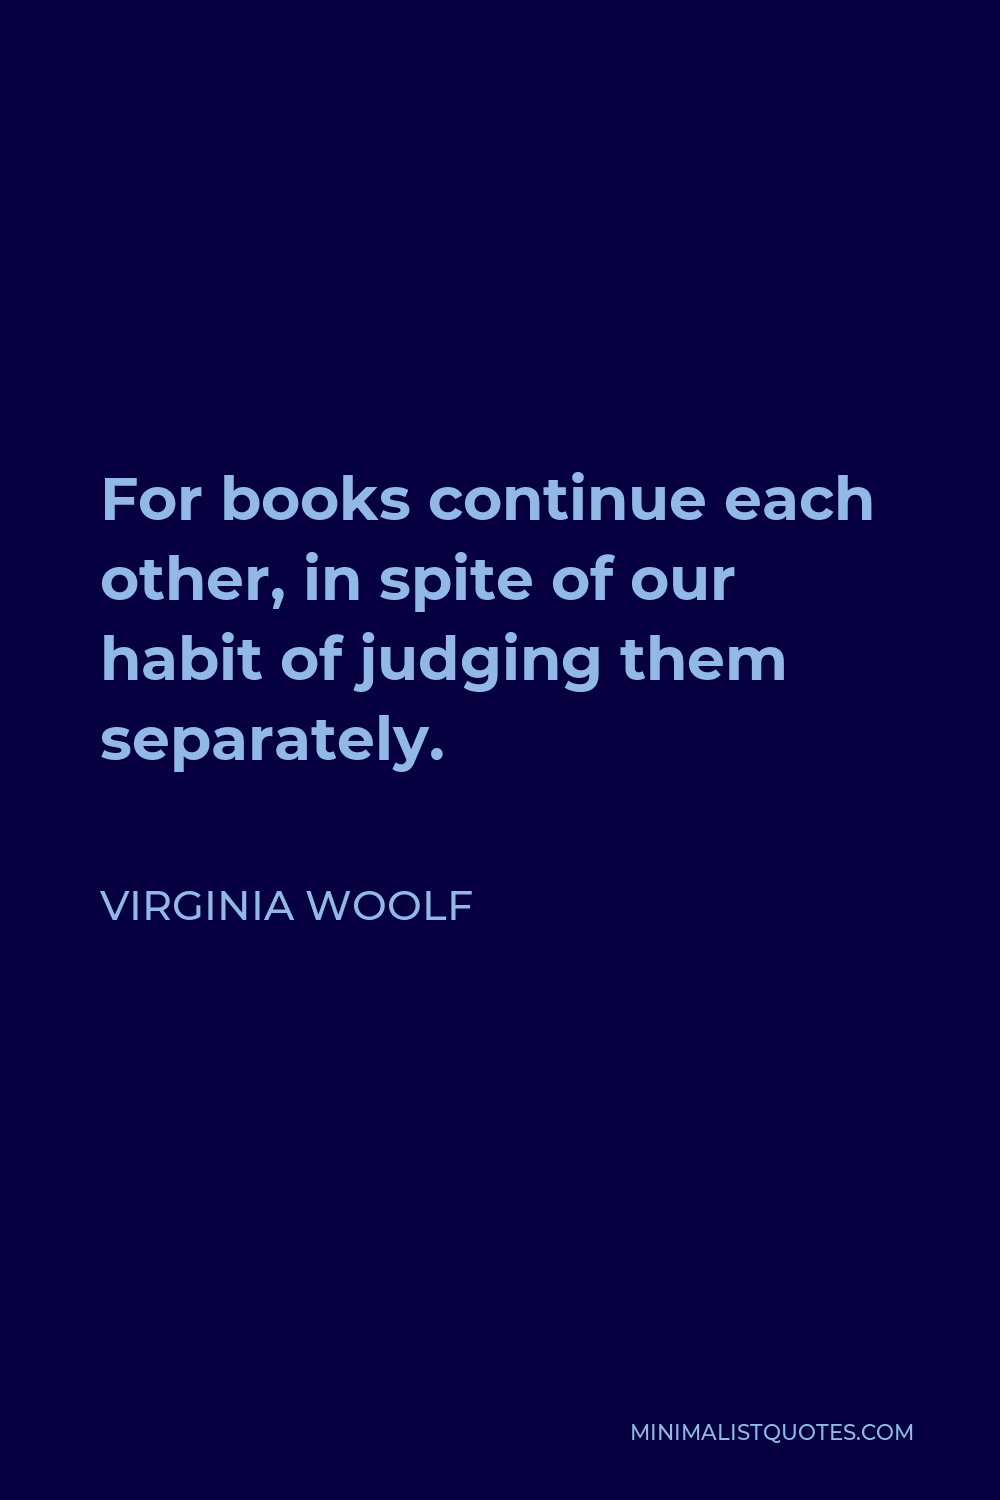 Virginia Woolf Quote - For books continue each other, in spite of our habit of judging them separately.